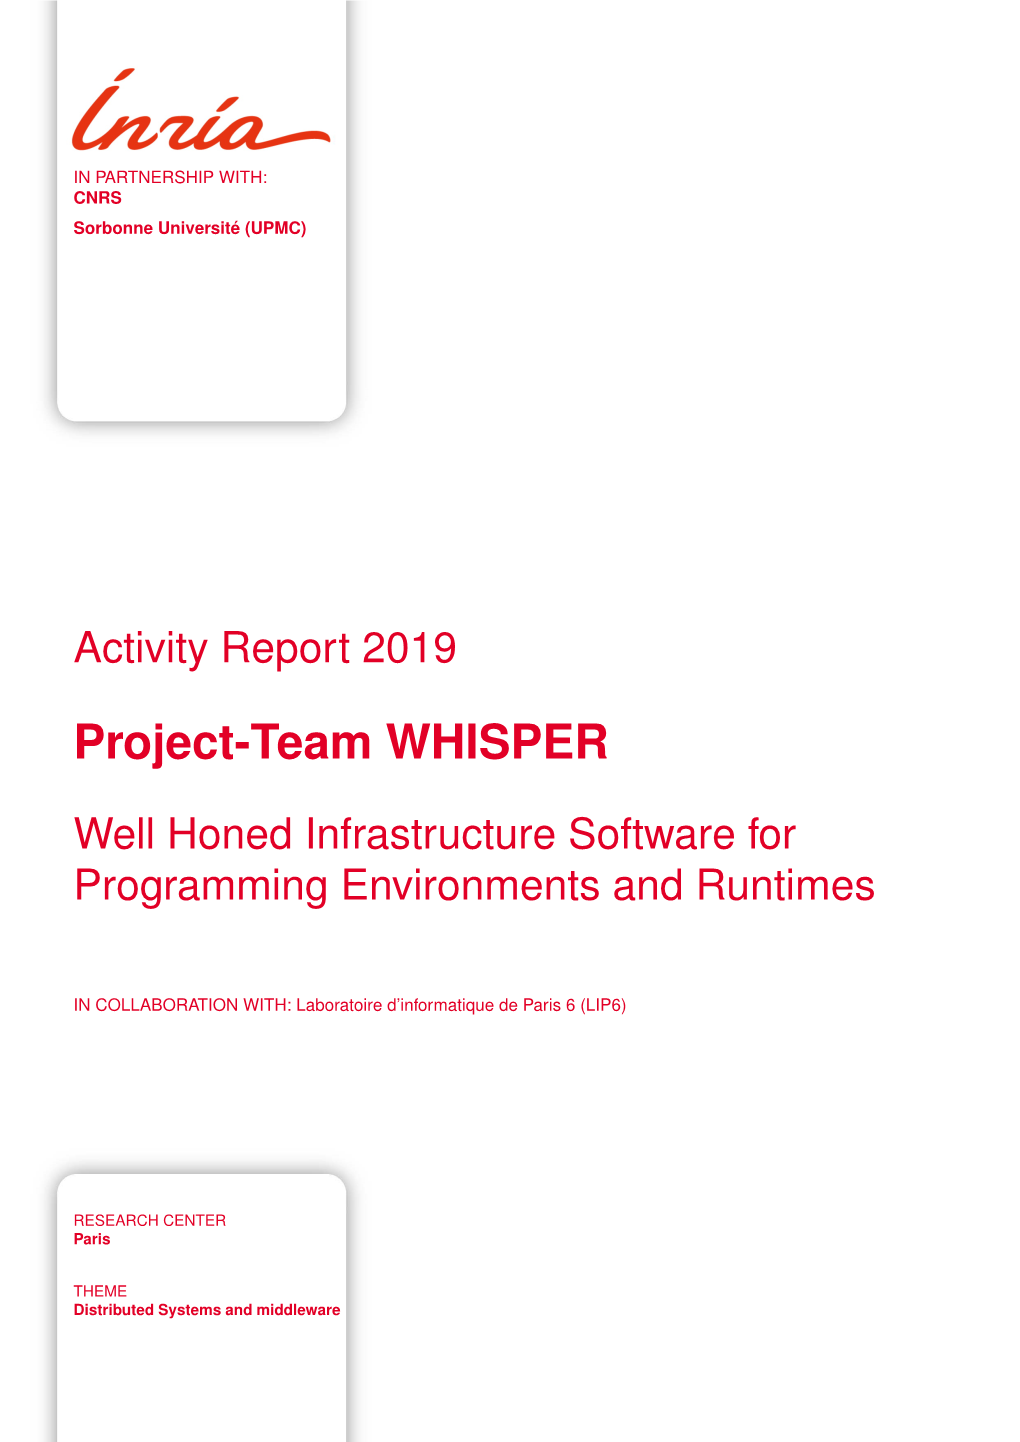 Project-Team WHISPER